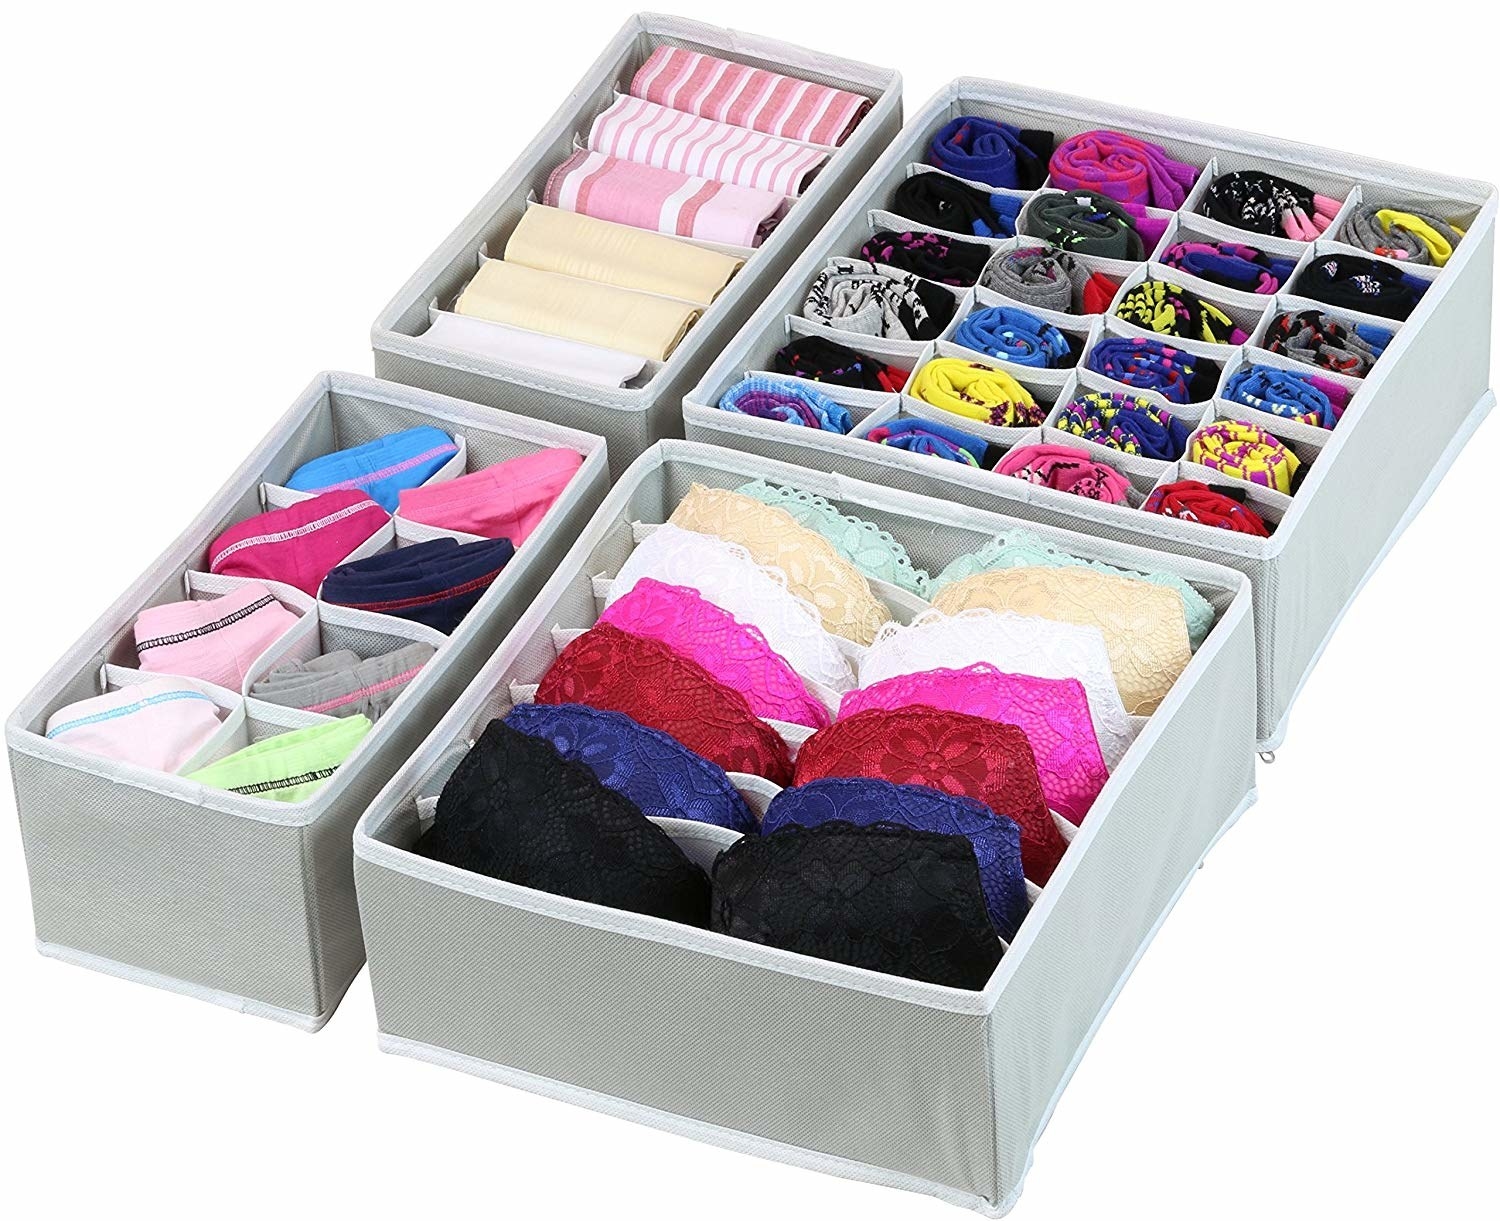 The set of four grey organizers with colorful garments in each